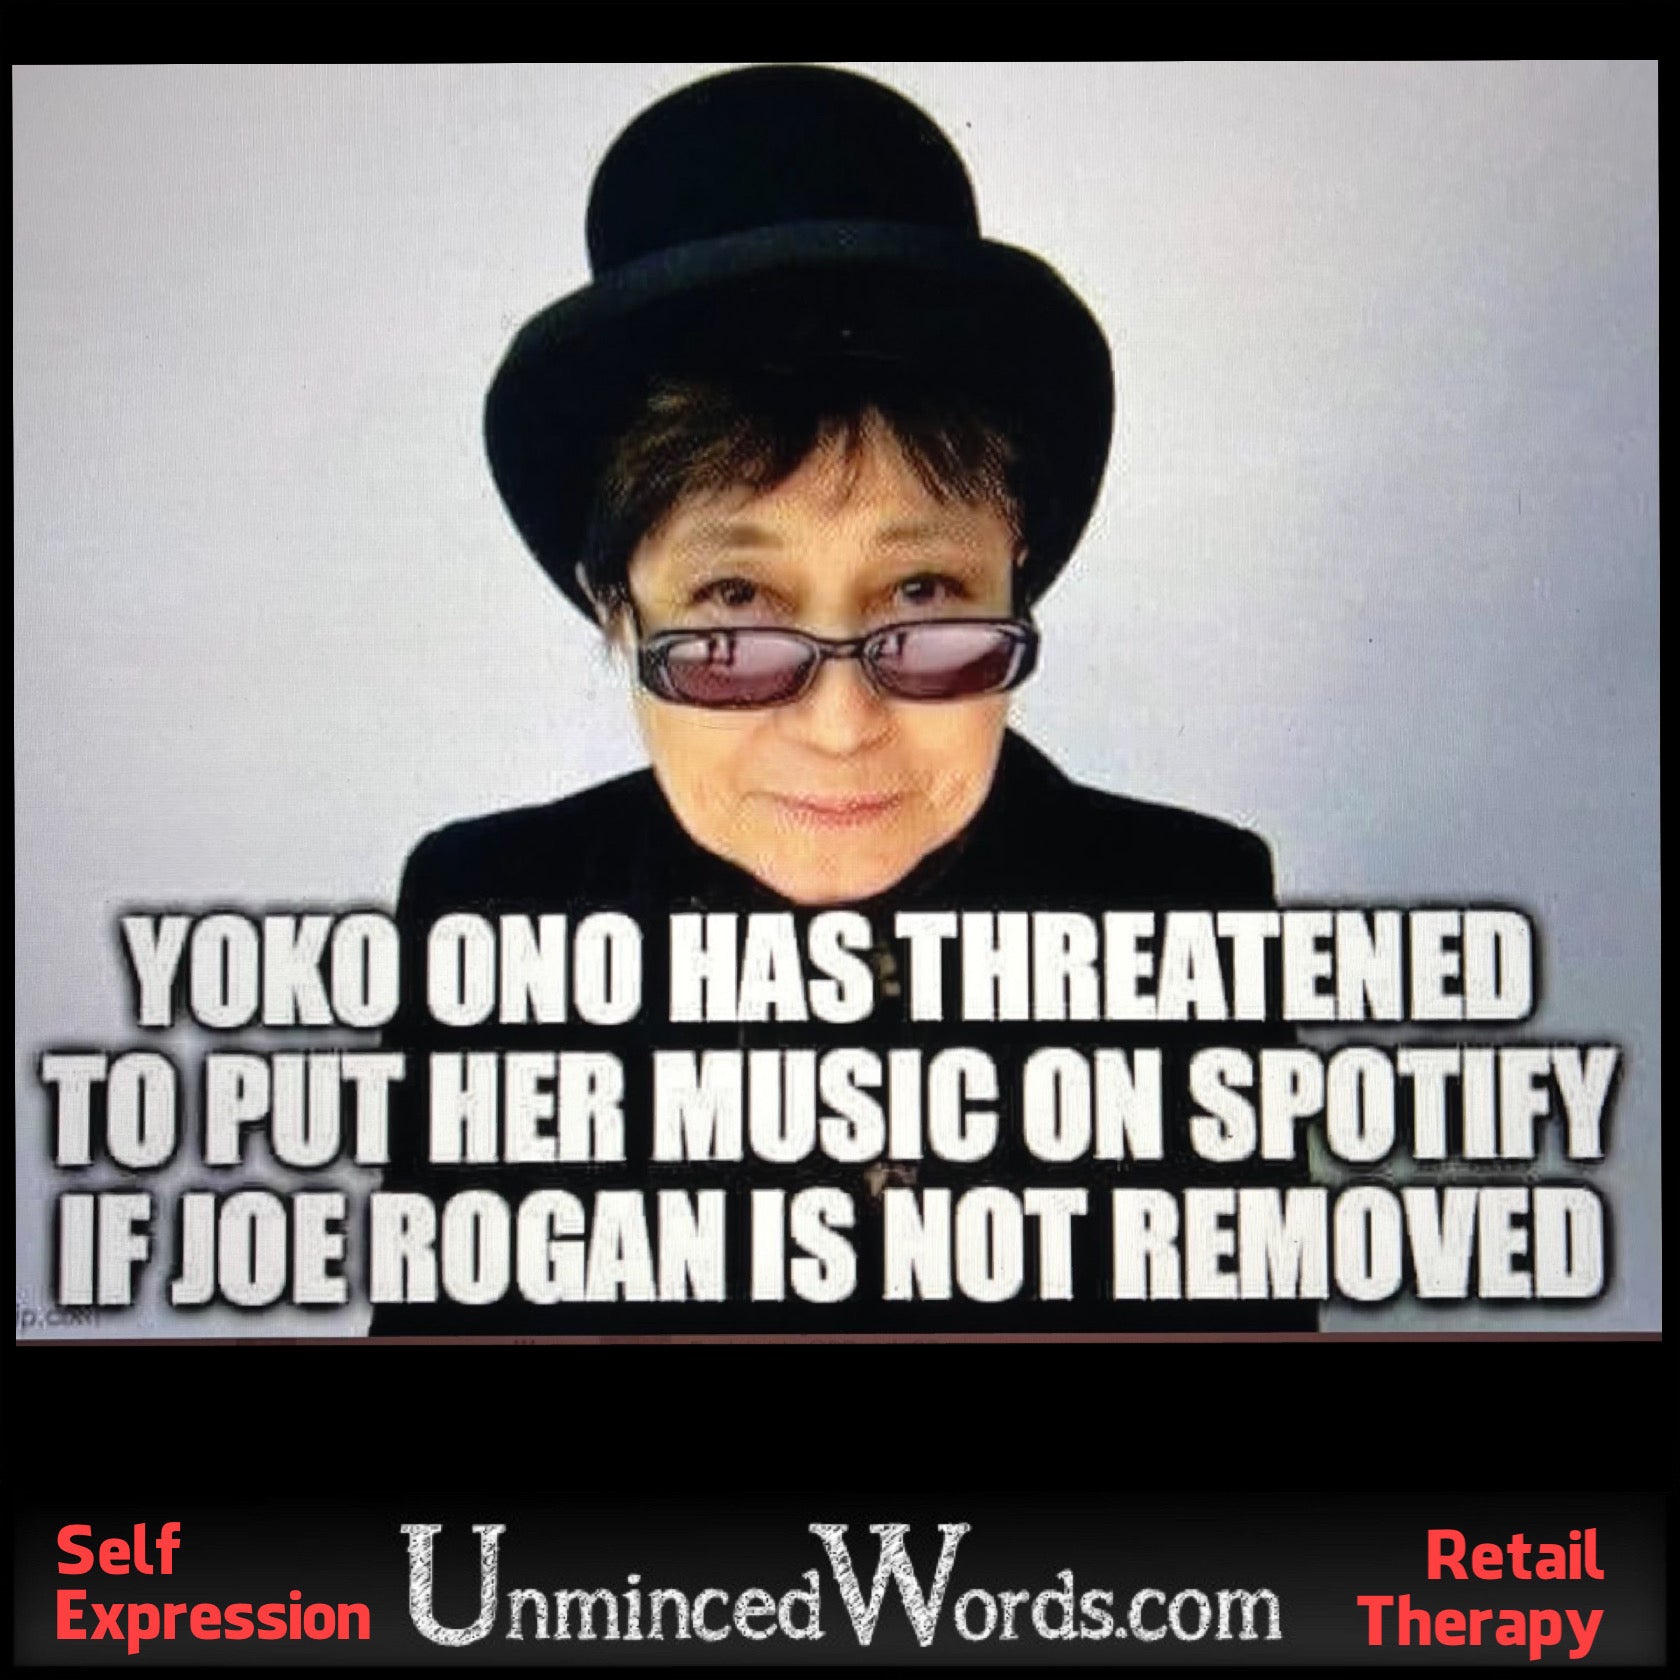 Yoko Ono Has Threatened To Put Her Music On Spotify If Joe Rogan Is Not Removed